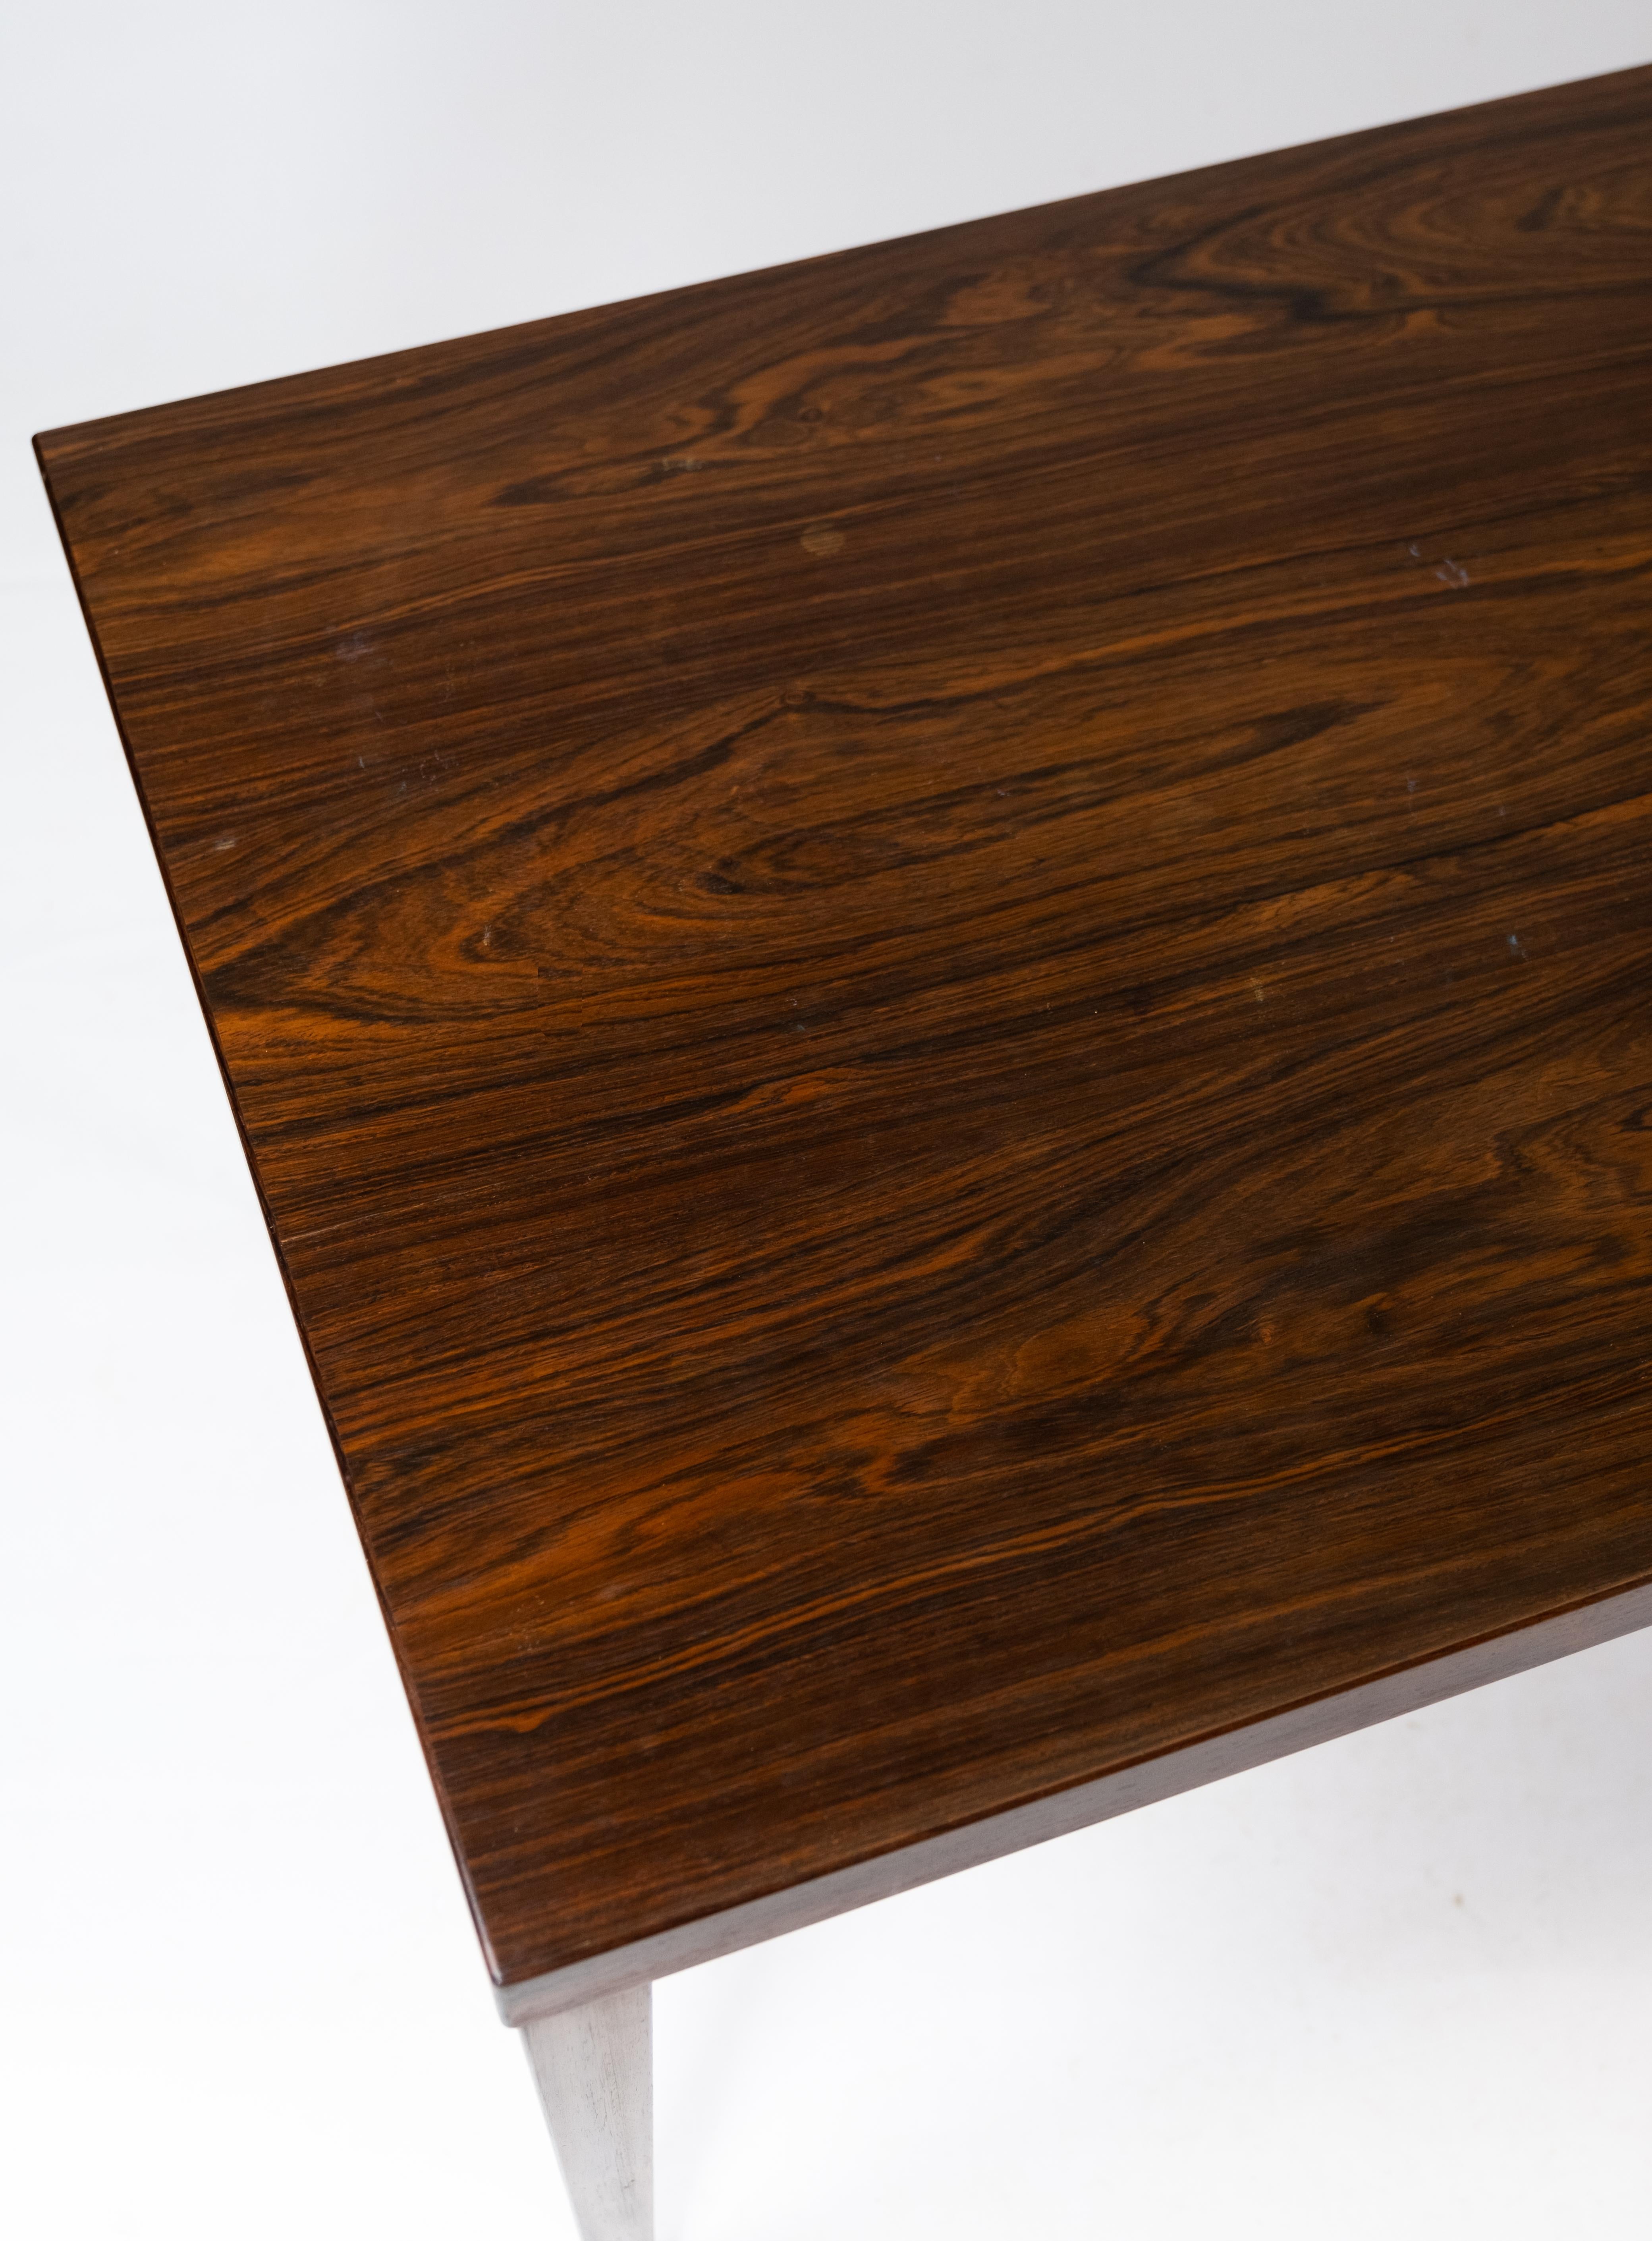 Mid-Century Modern Coffee Table Made In Rosewood, Danish Design From 1960s For Sale